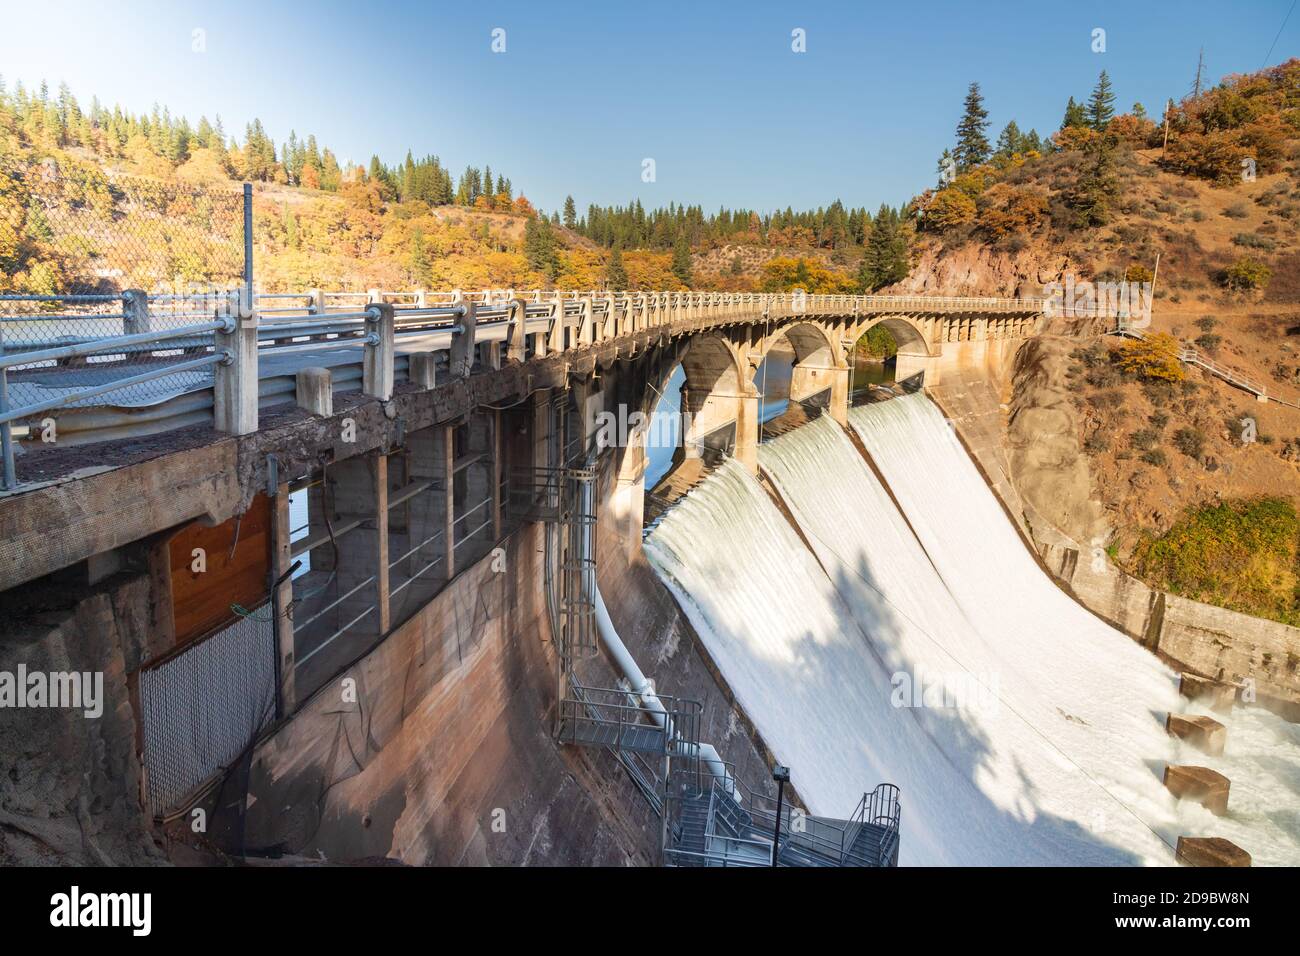 Outflow at the Pit 3 Dam/Bridge in Shasta County California, USA.  The dam is part of Pacific Gas and Electric Company’s Pit River Project. Stock Photo